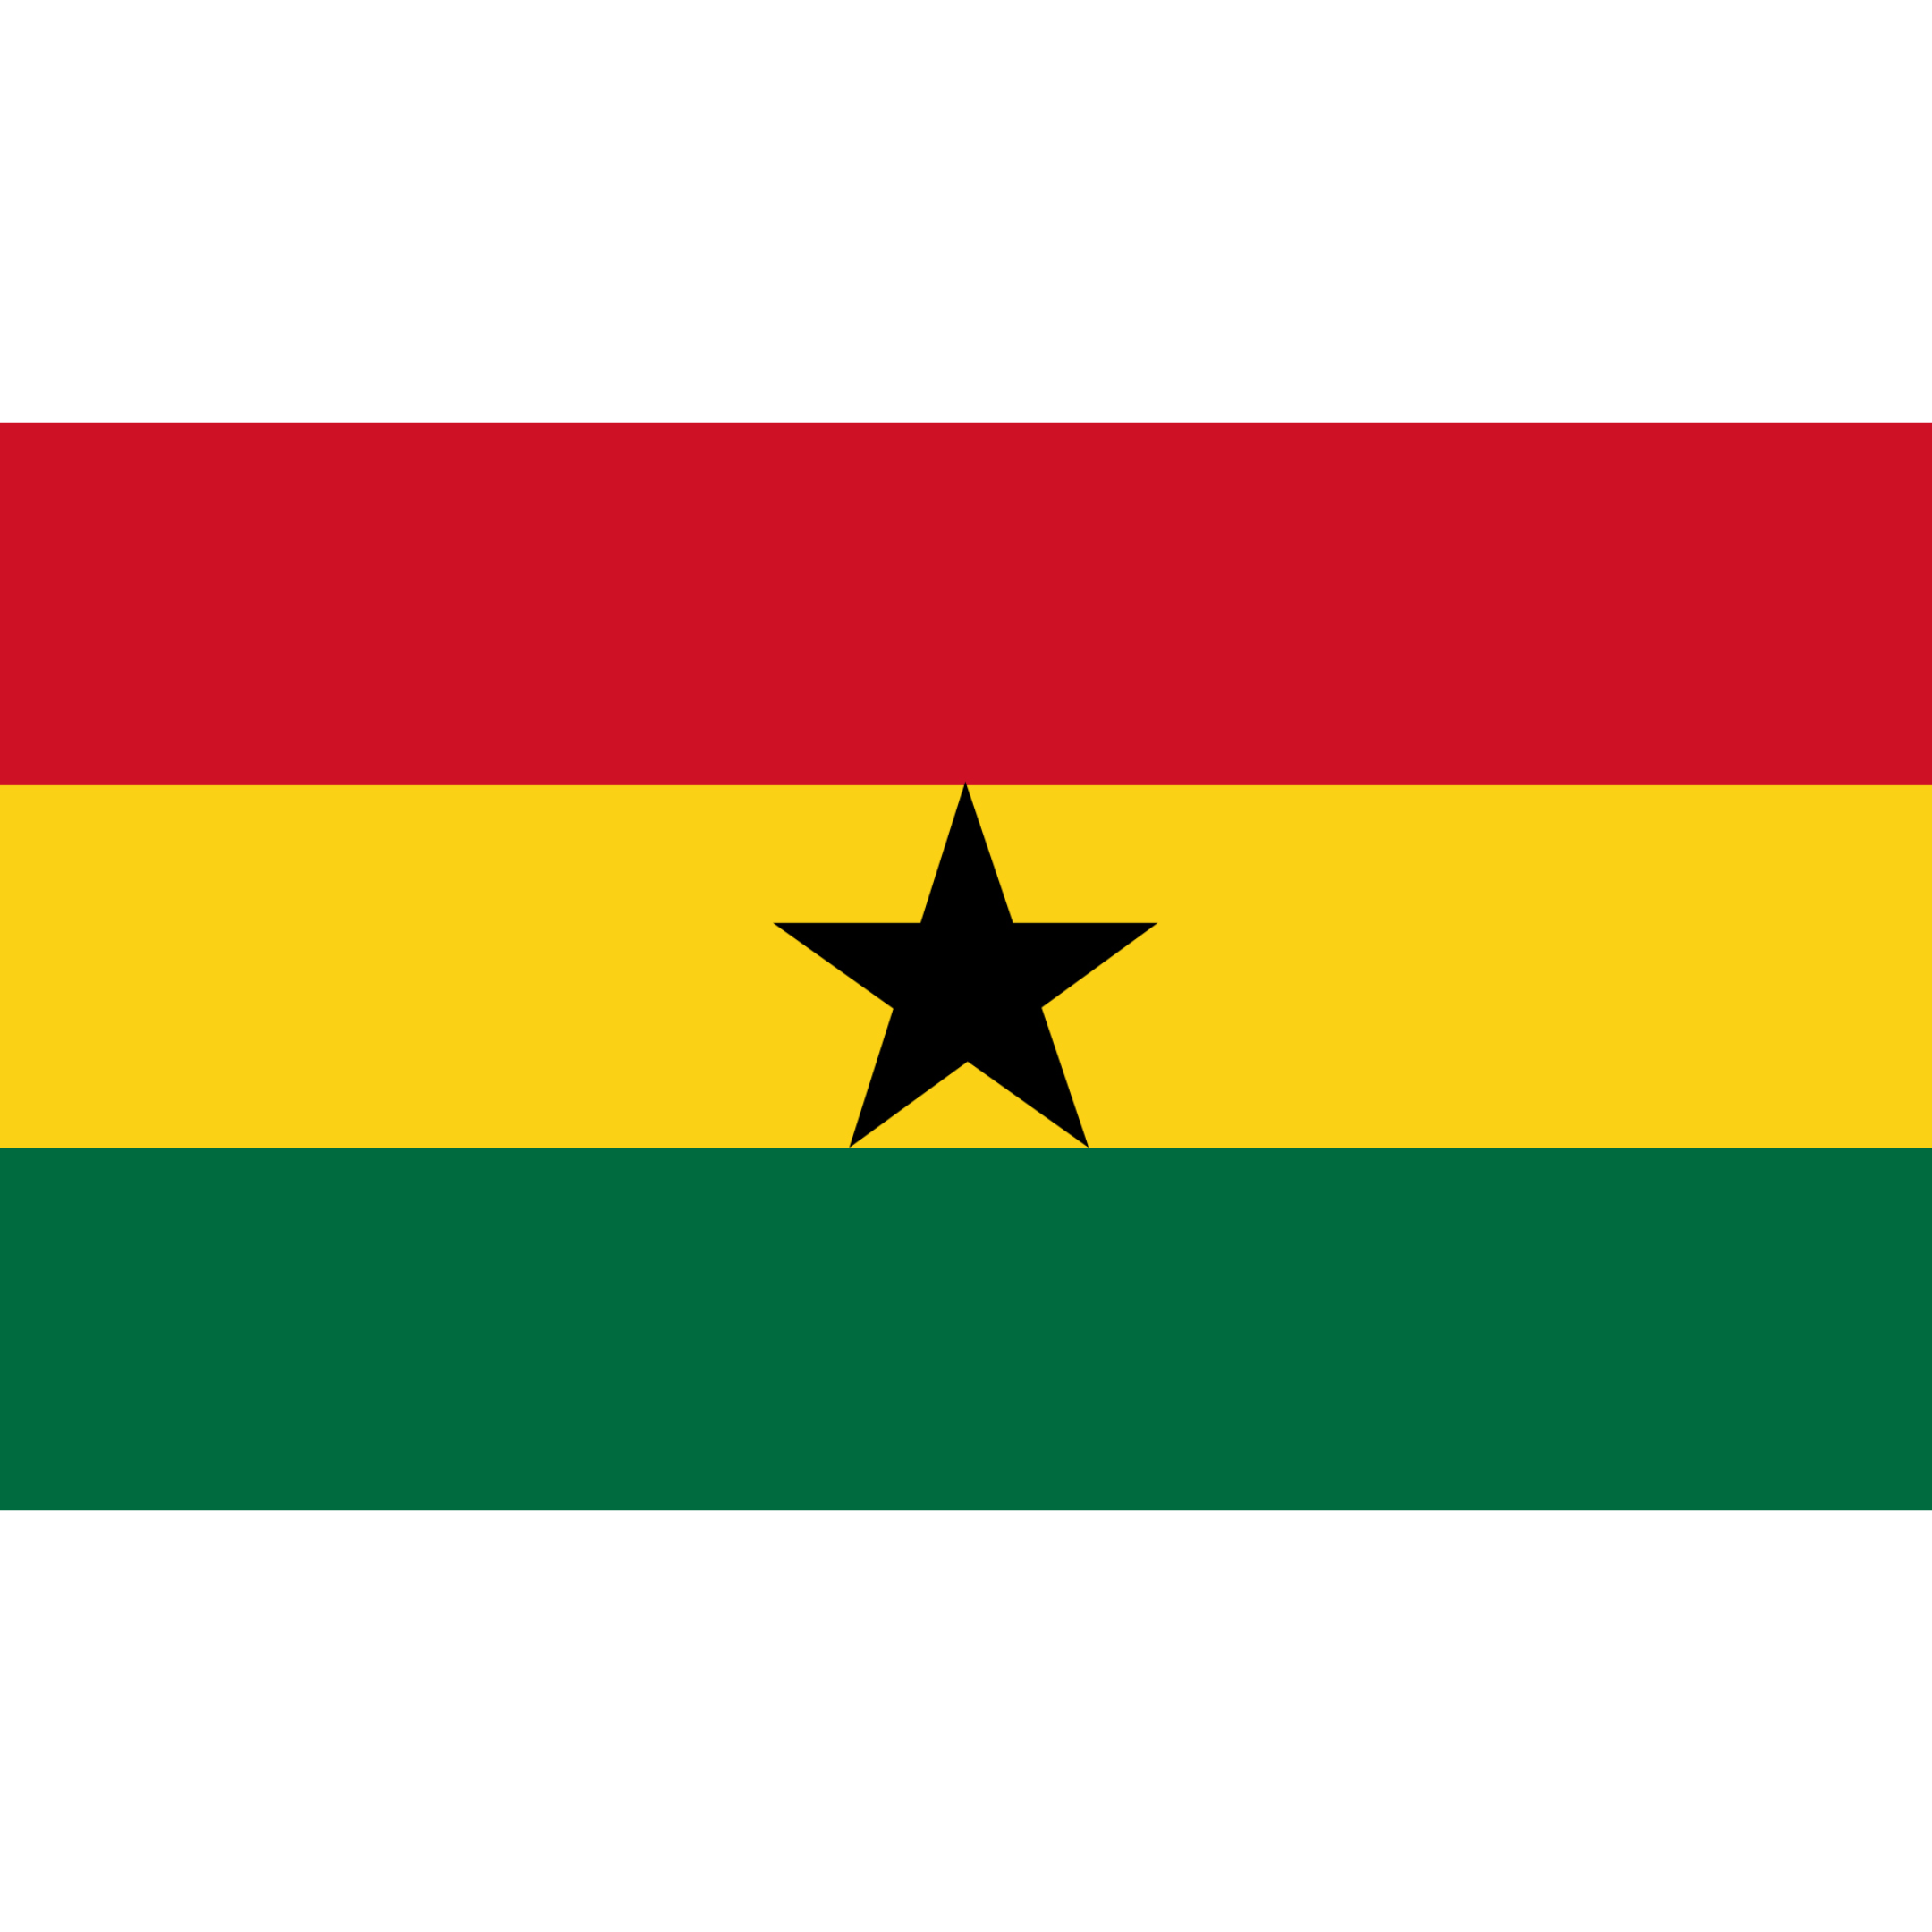 The flag of Ghana consists of three horizontal bands in red, gold and green with a black five-point star in the centre.